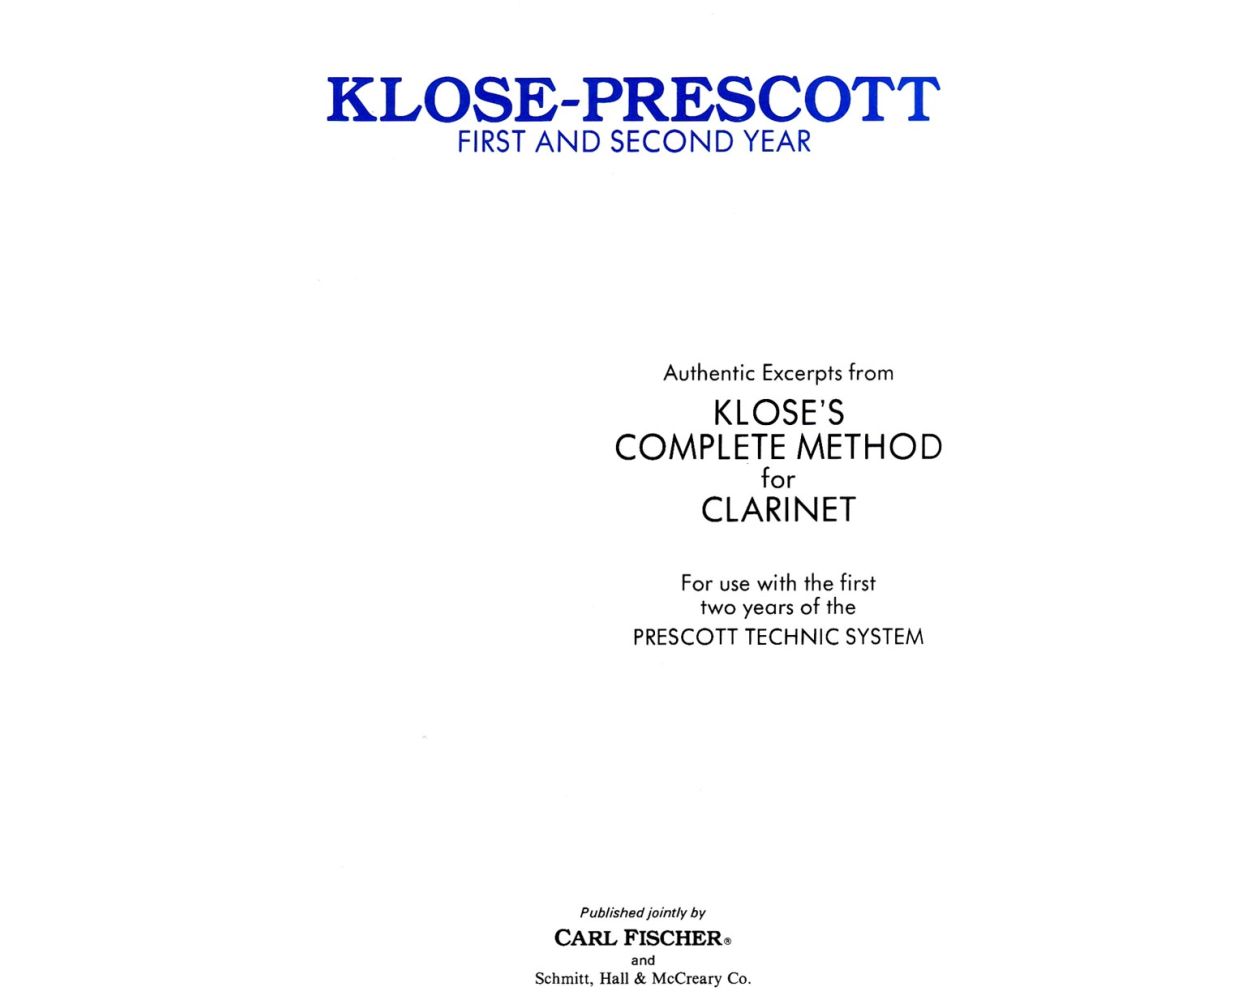 Klose/Prescott - Authentic Excerpts from Klose's Complete Method for the Clarinet (First and Second Year)